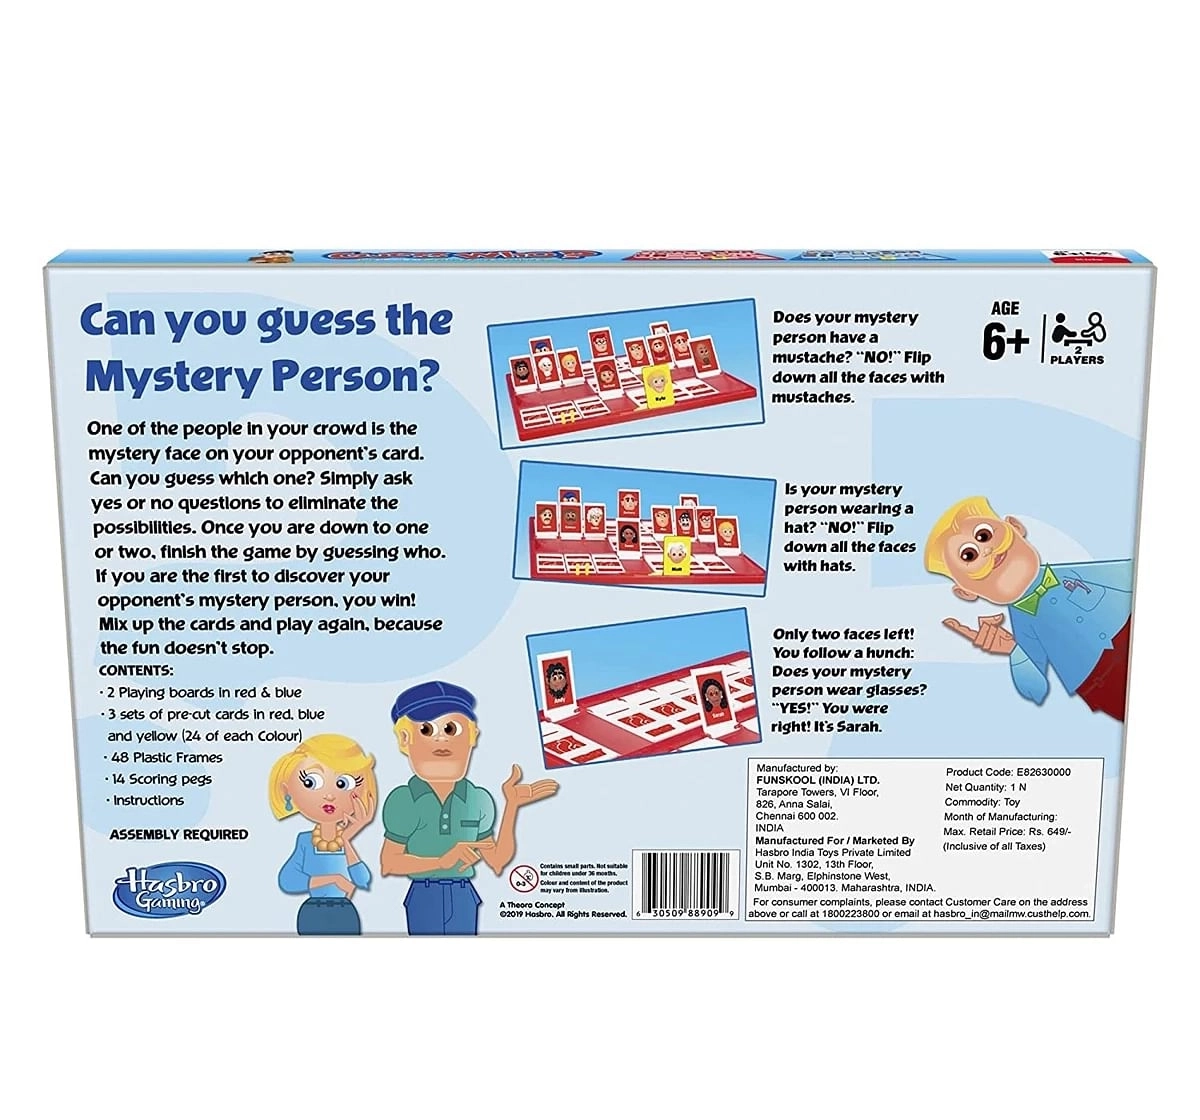 Hasbro Gaming Guess Who? Original Guessing Game For Kids Ages 6 & Up for 2  Players